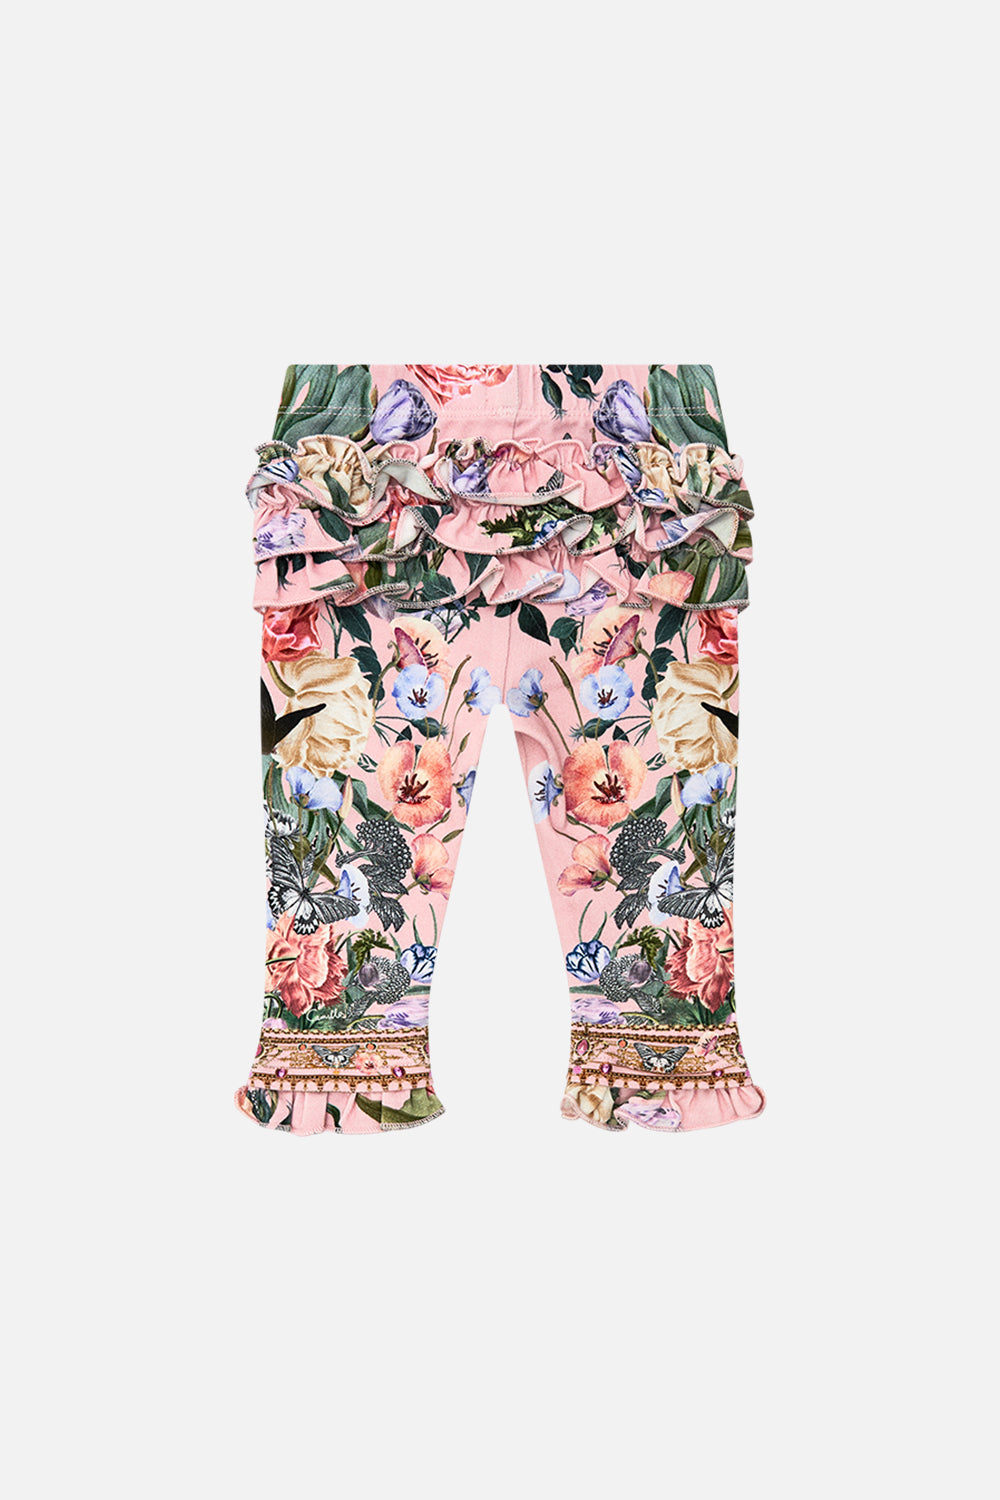 Milla by CAMILLA floral babies leggings with frills in Woodblock Wonder